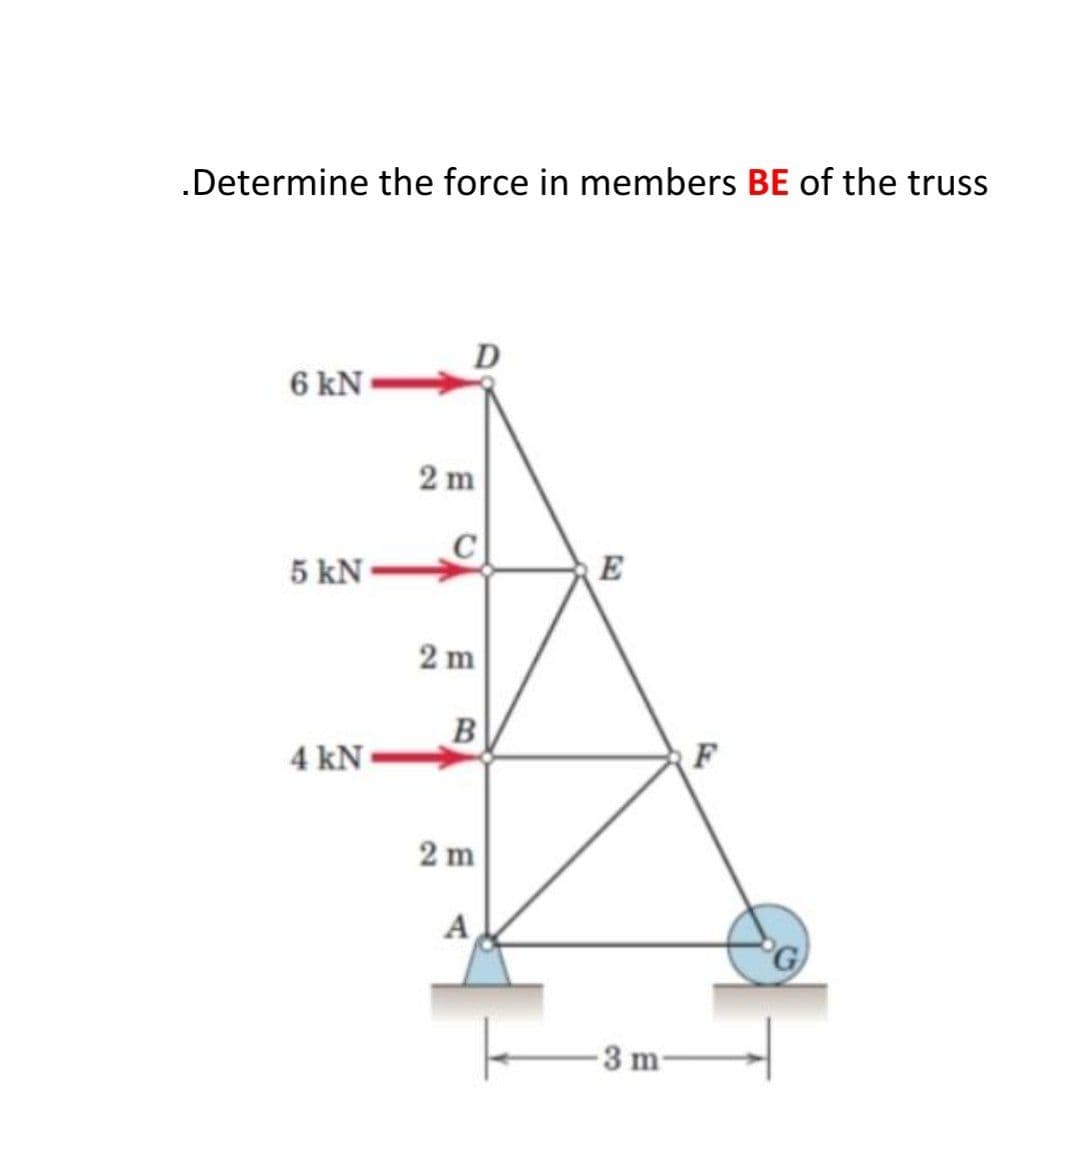 .Determine the force in members BE of the truss
D
6 kN
2 m
5 kN
E
4 kN
2 m
A
-3 m-
2.
